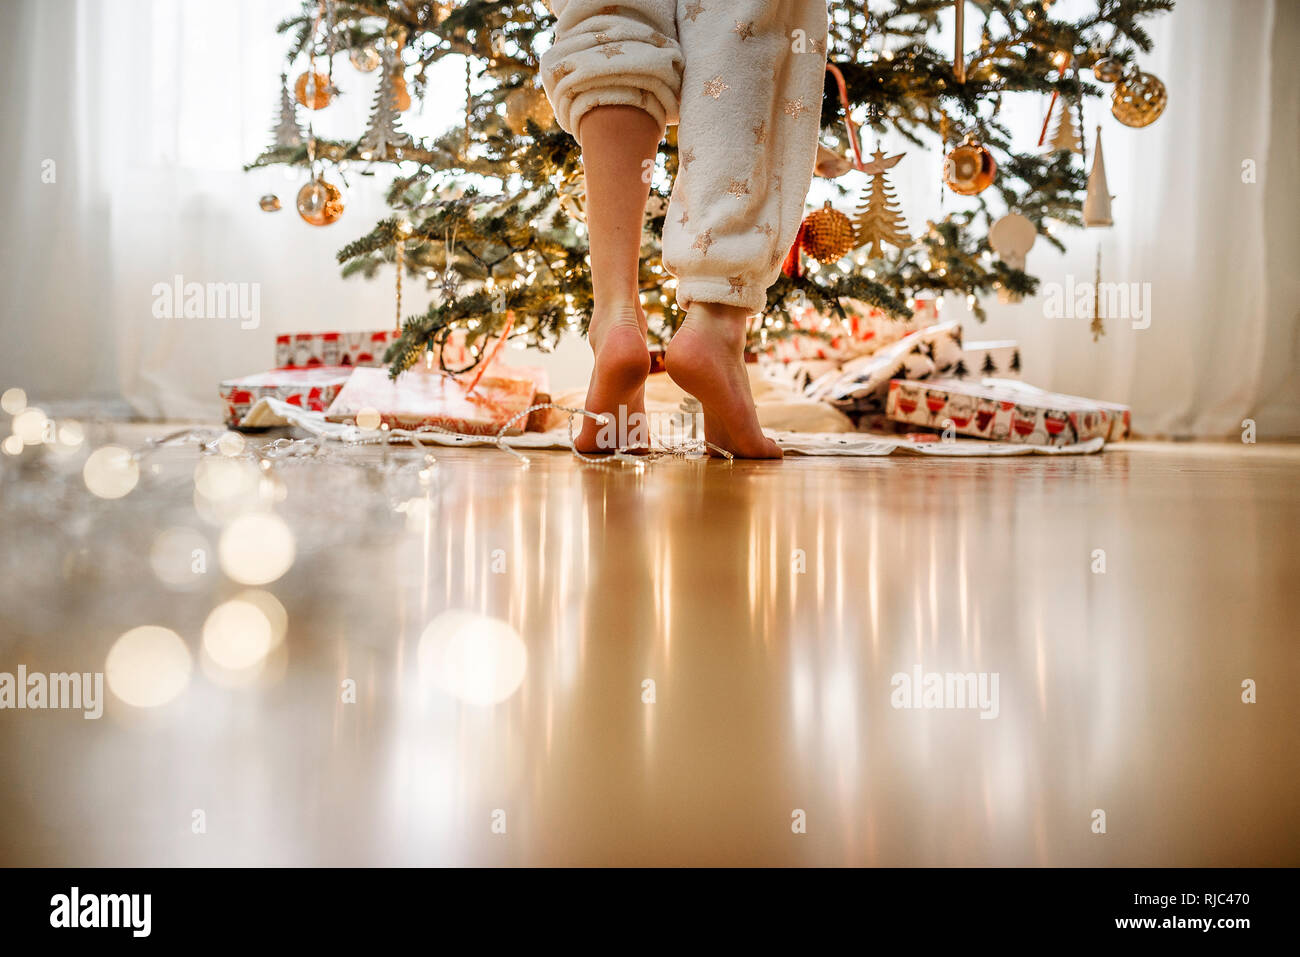 Close-up of a girl's legs standing by a Christmas tree Stock Photo